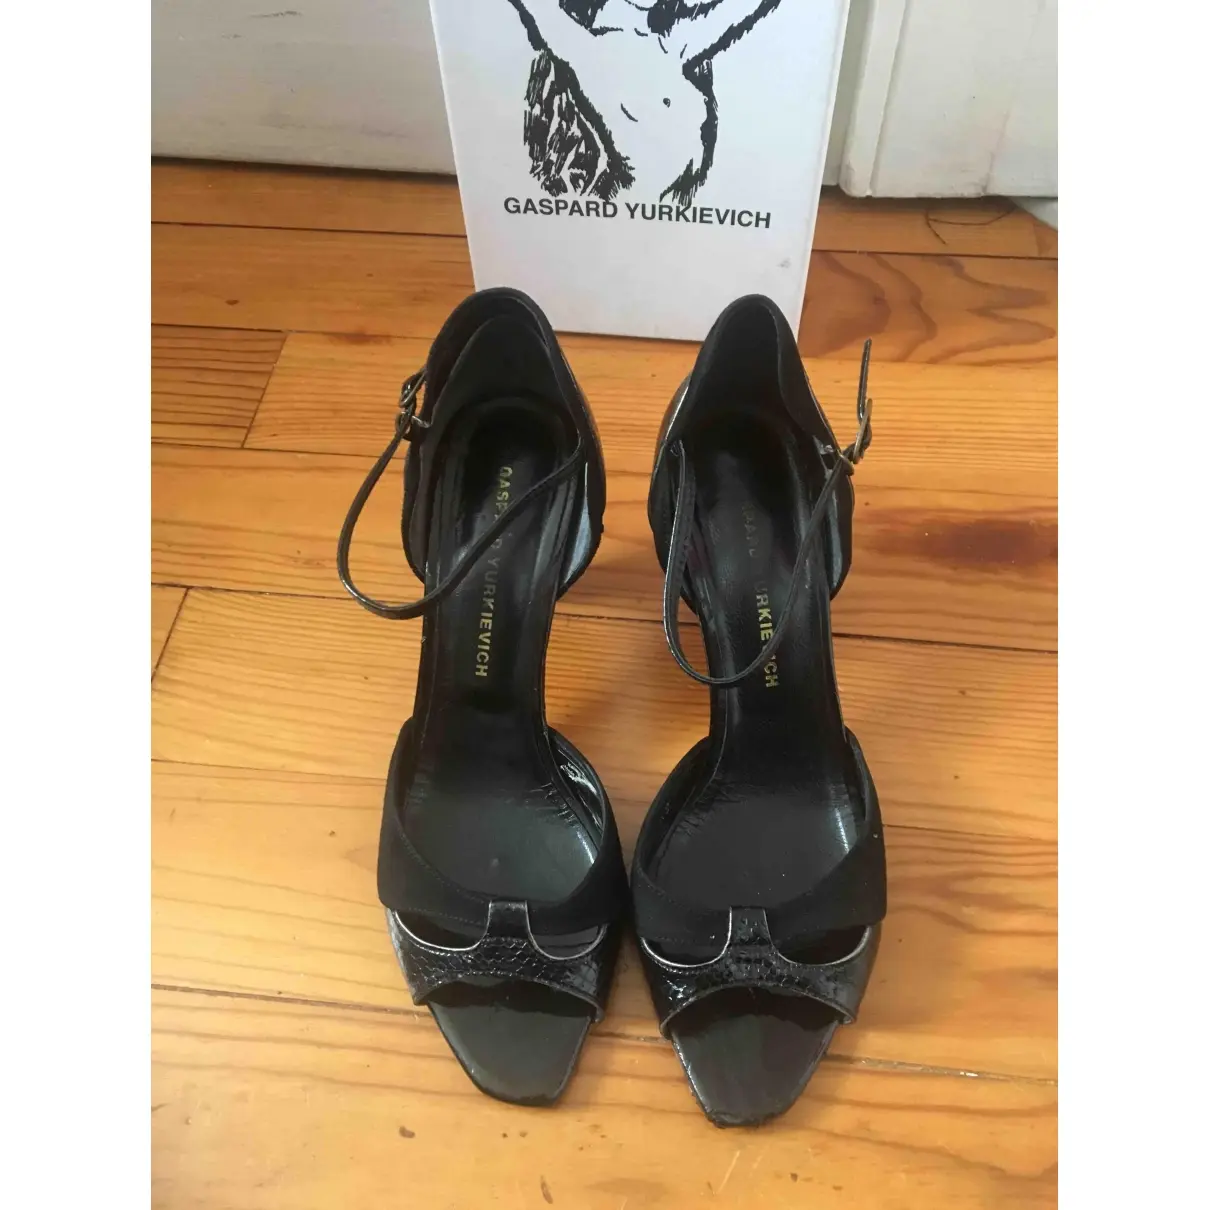 Gaspard Yurkievich Patent leather sandals for sale